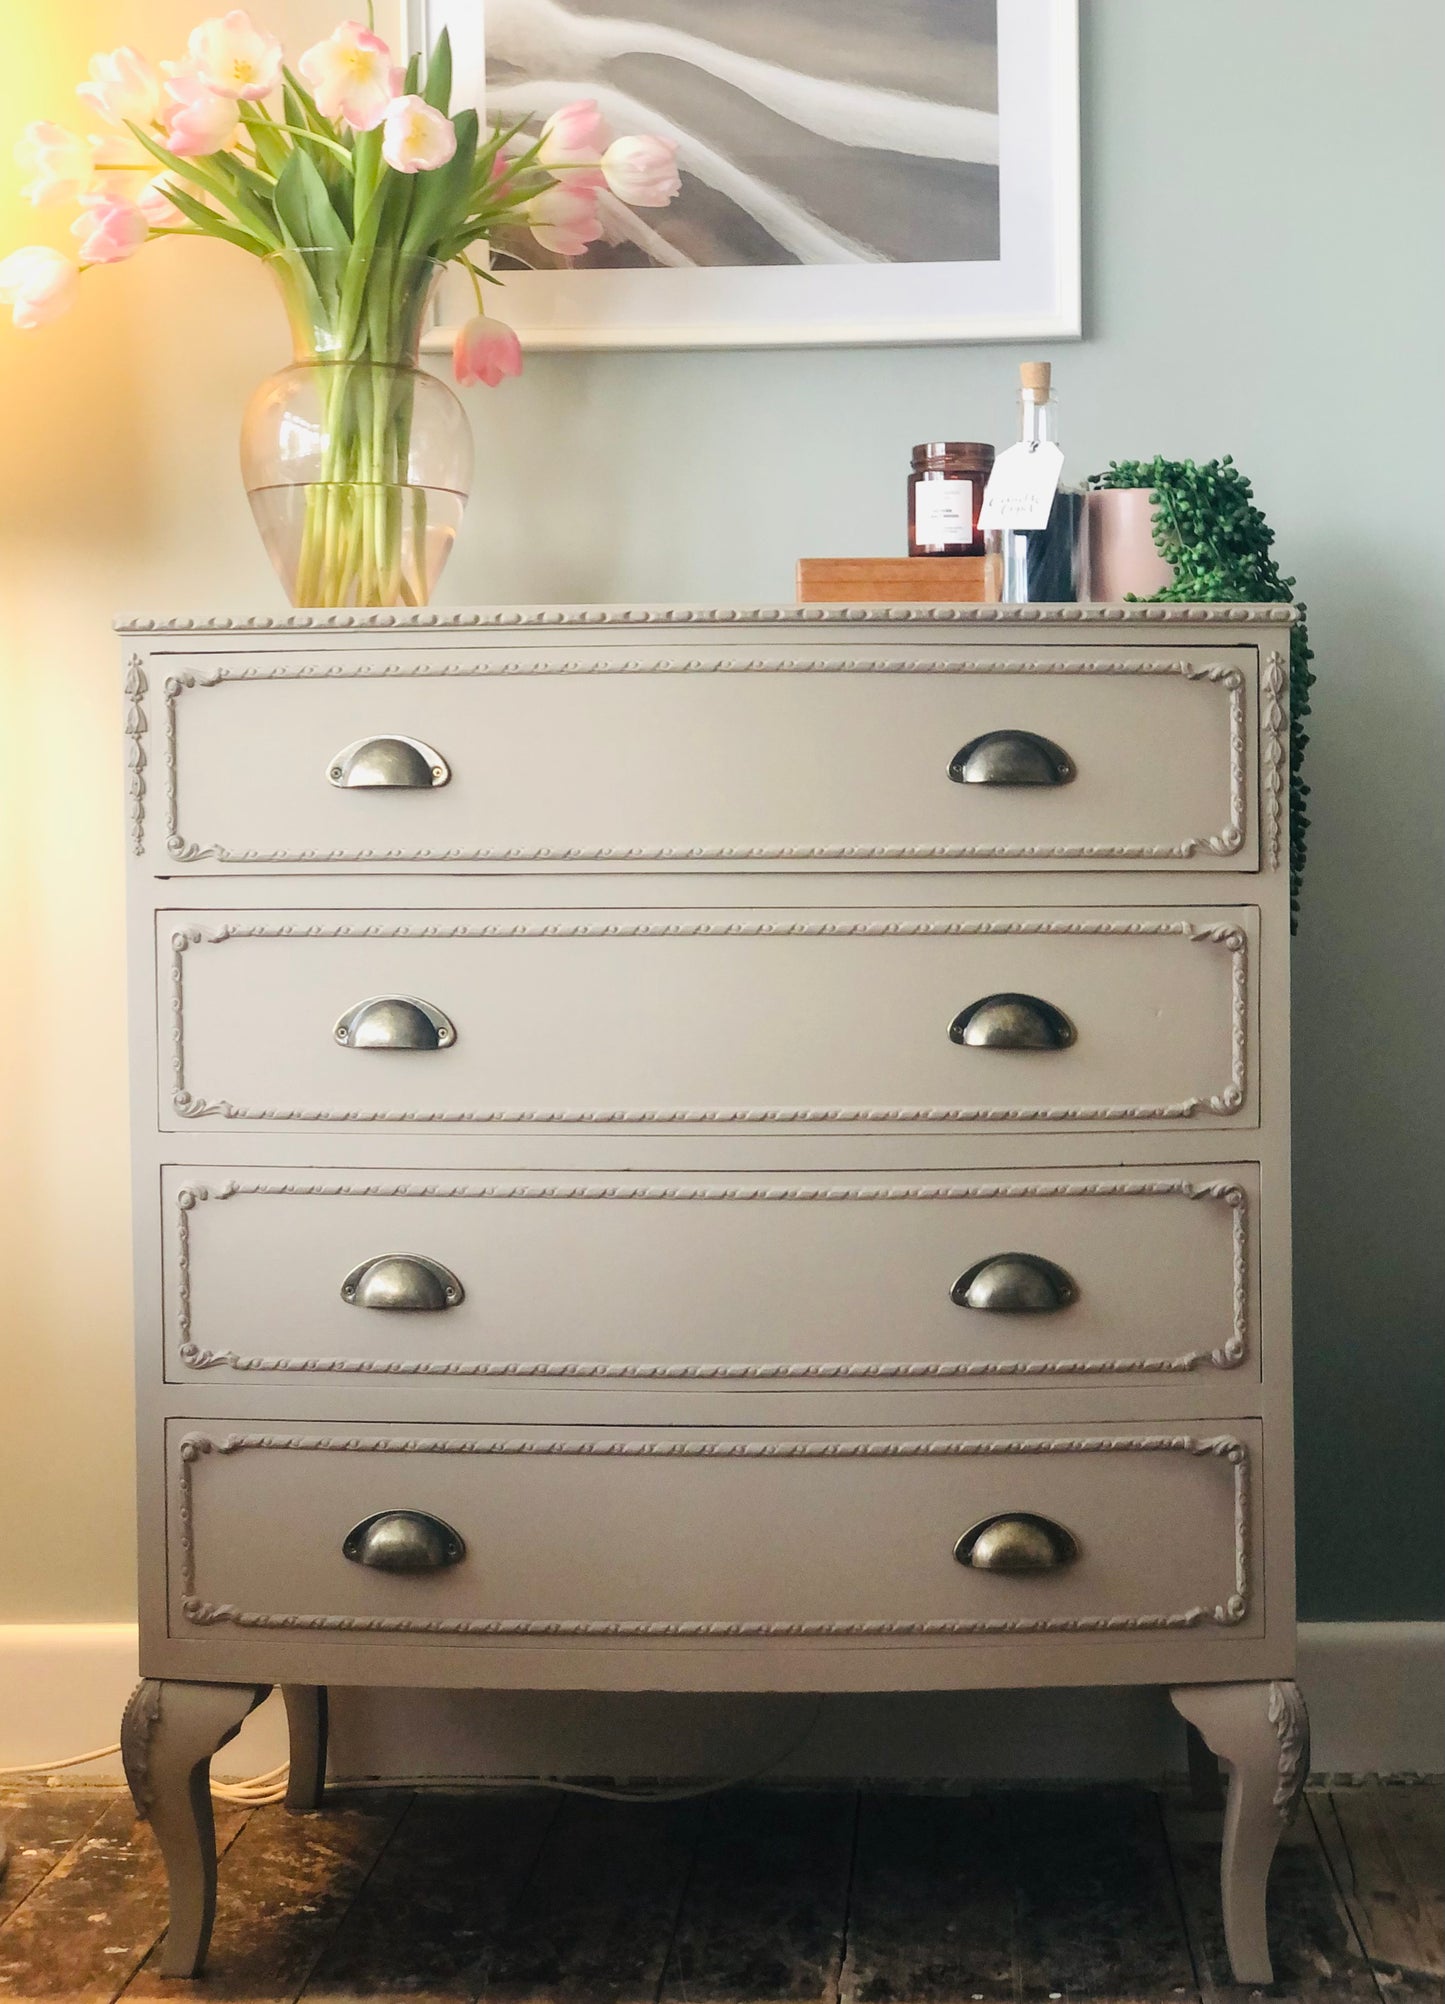 Queen Anne/French style neutral painted vintage chest of drawers with modern cup handles